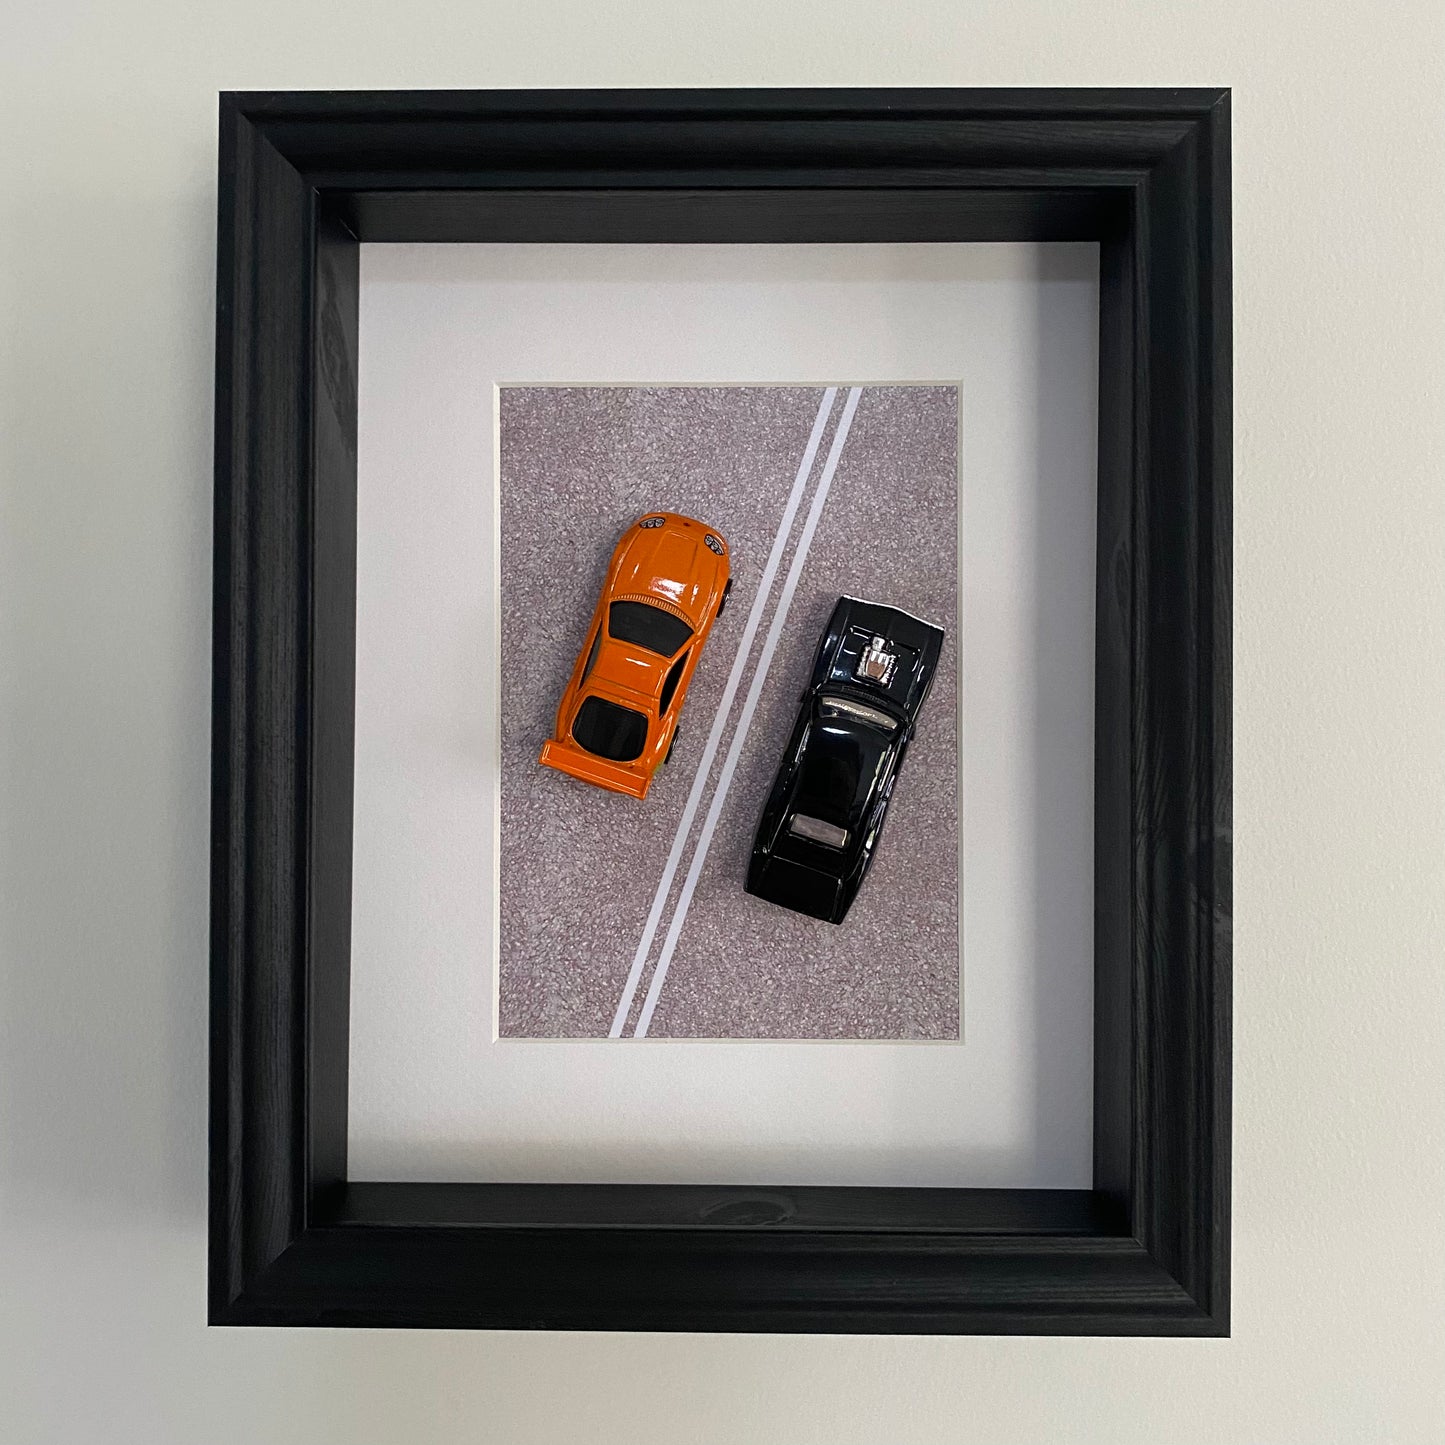 WALL ART - Hot Wheels Fast & Furious Supra & Charger Mounted in Frame (28 x 23 cm) L88